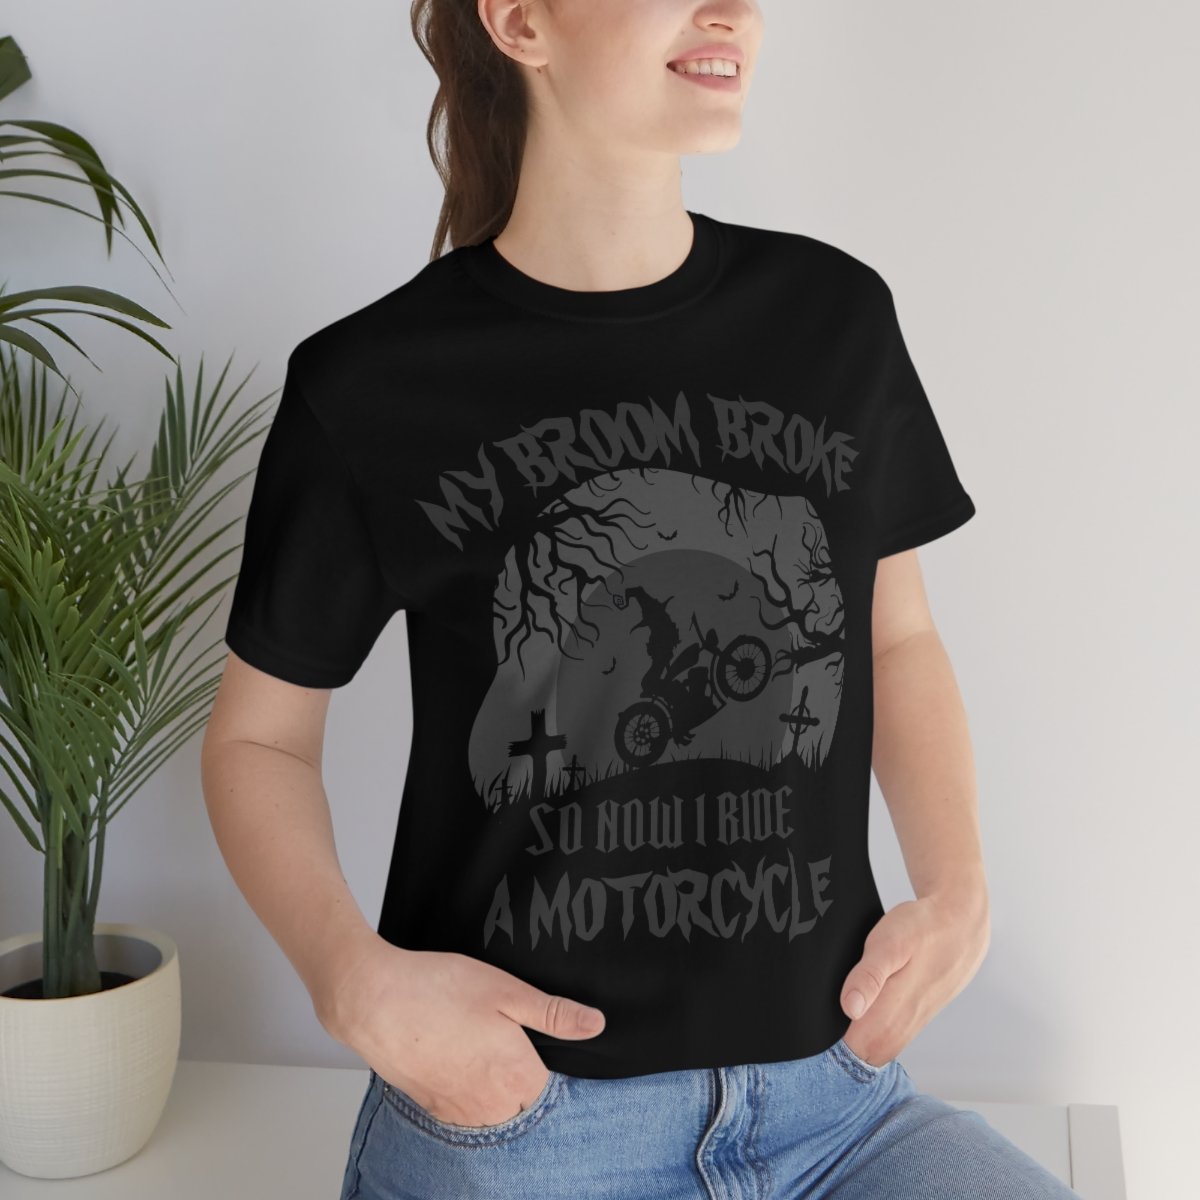 My Broom Broke So I Ride A Motorcycle - Stealthy Dark Gray - Unisex Jersey Short Sleeve Tee - Other Colors